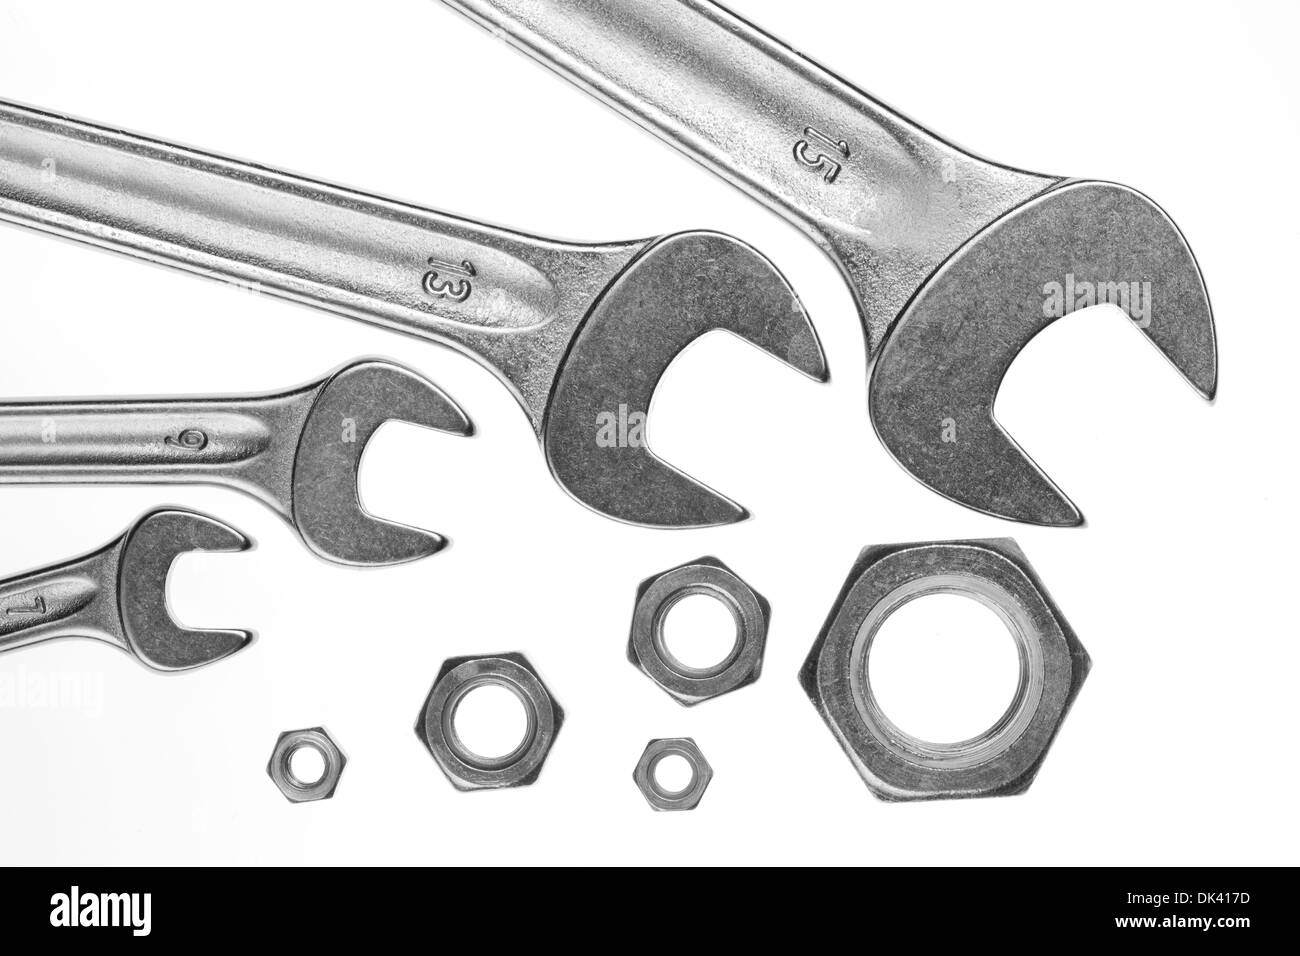 Spanners and nuts, isolated Stock Photo